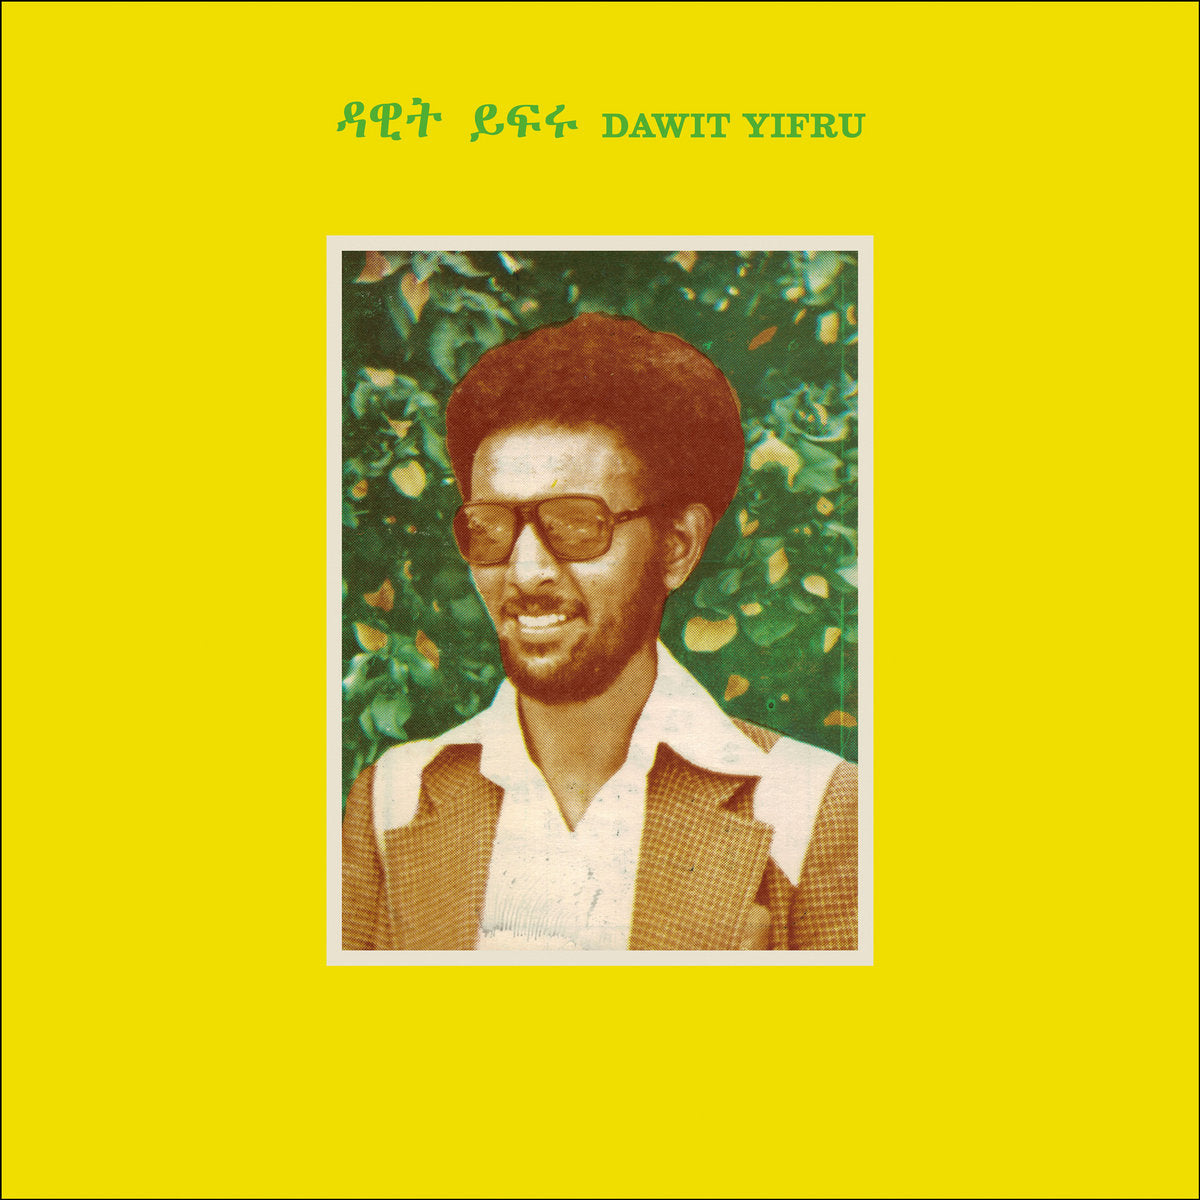 Album cover featuring a portrait of a man with an afro and sunglasses, set against a yellow background and green foliage, with Amharic text at the top promoting Dawit Yifru - Dawit Yifru.